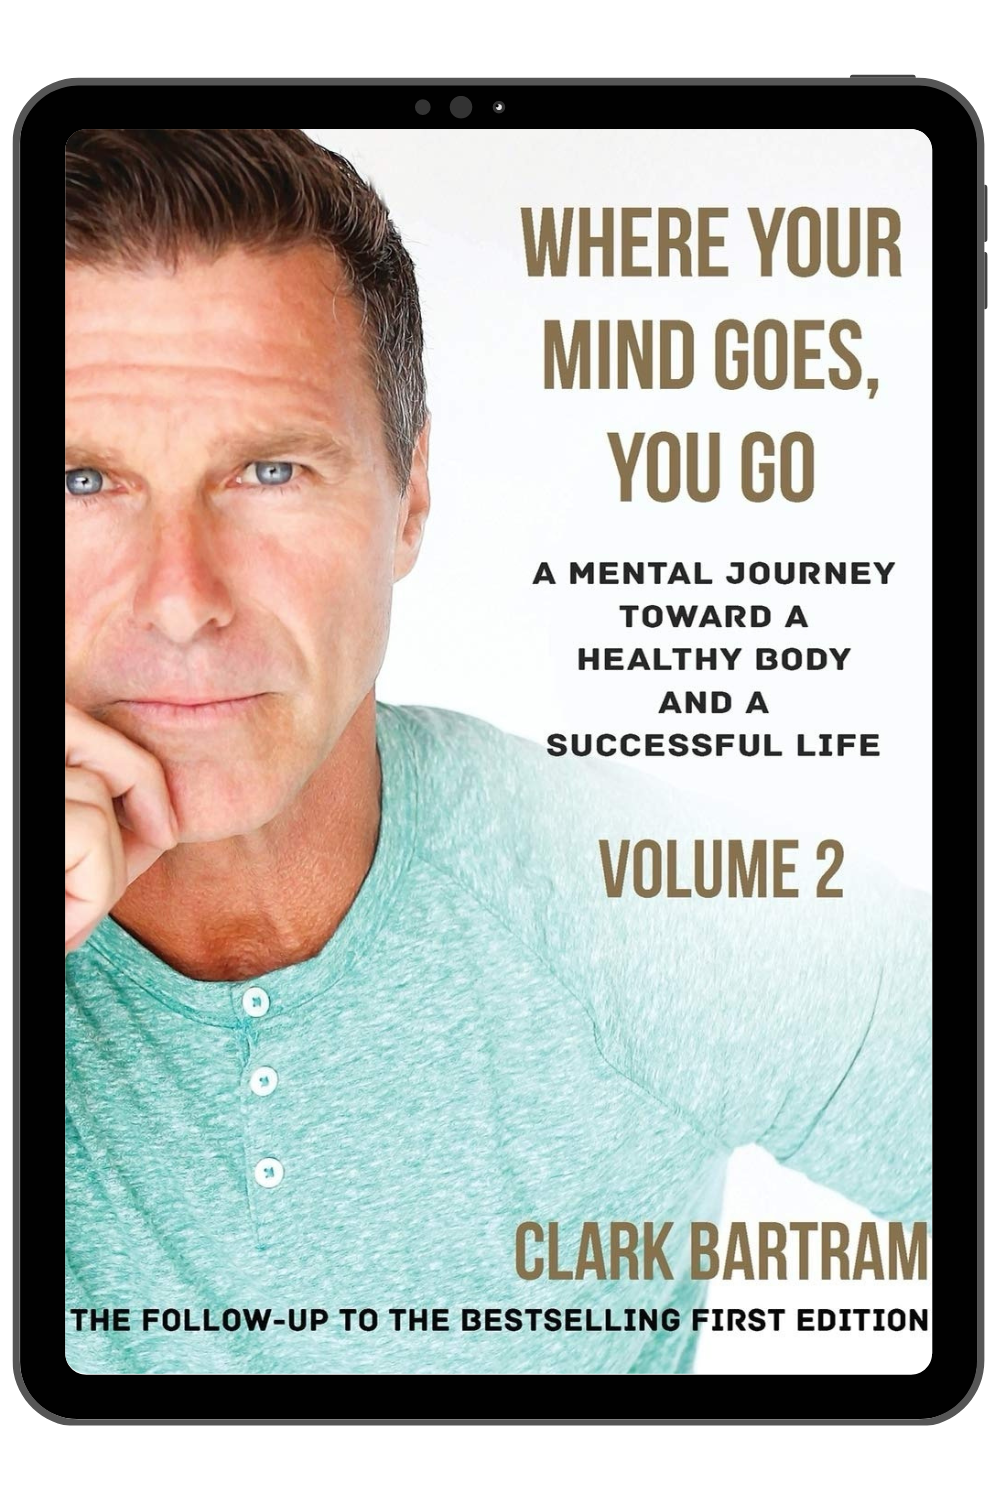 Where Your Mind Goes, You Go Vol. 2 - eBook by Clark Bartram